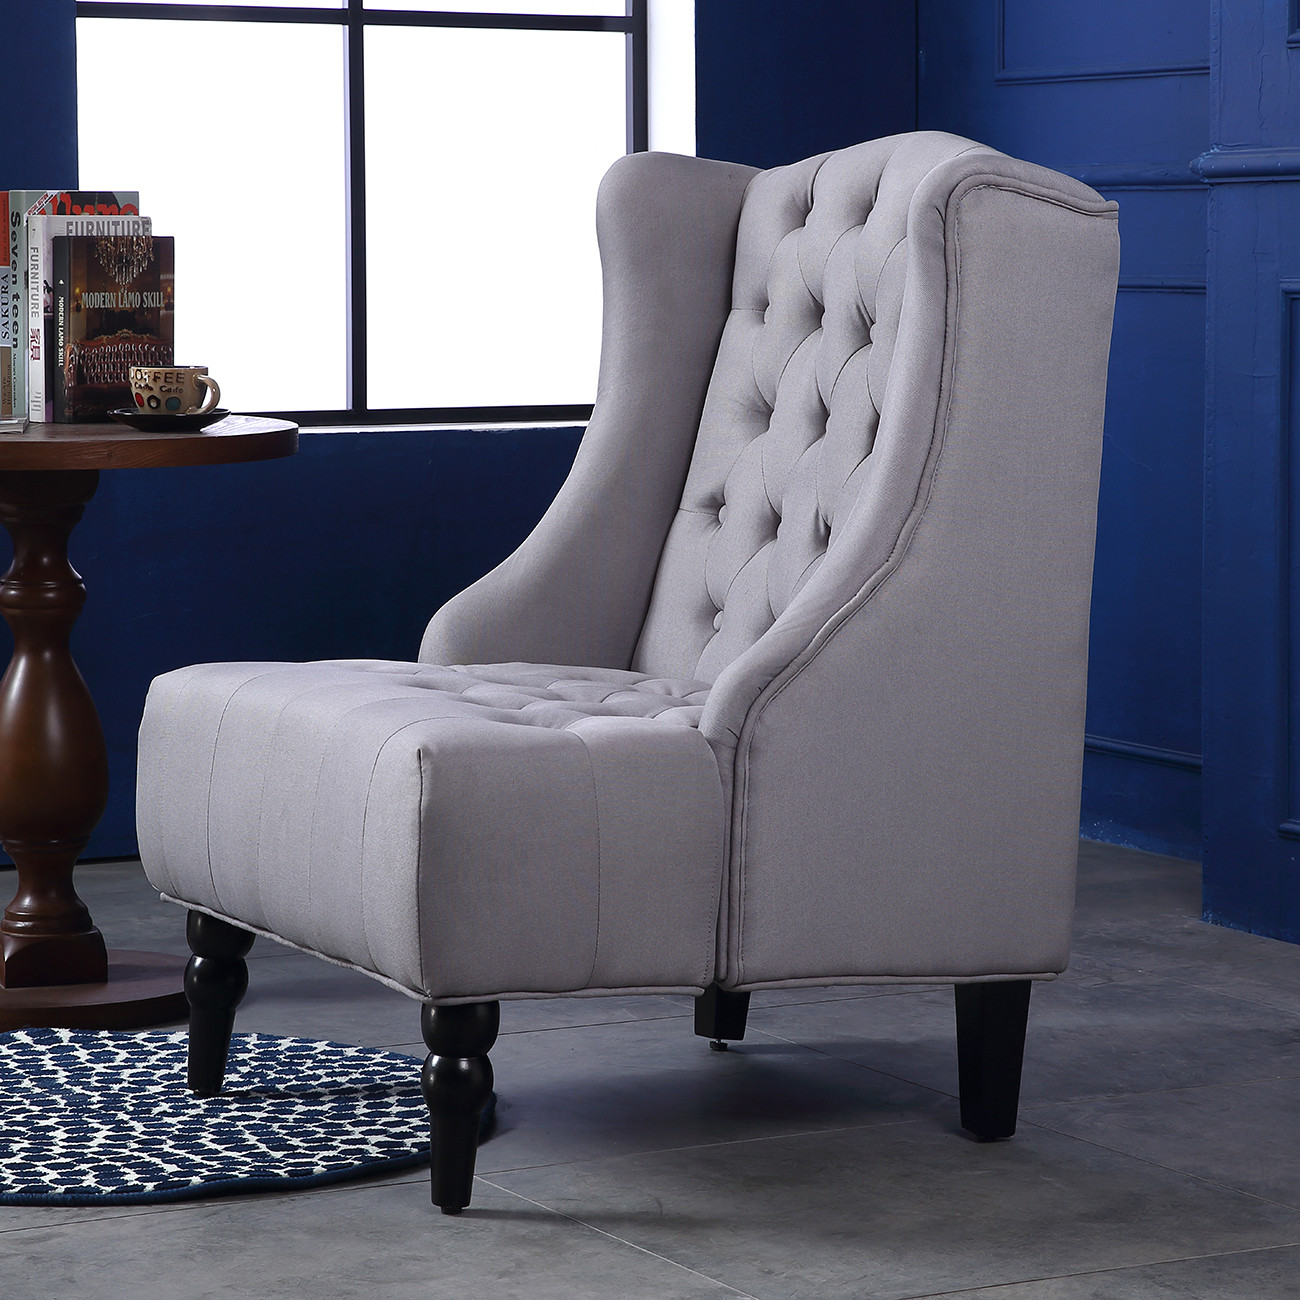 Accent Chairs Living Room
 Wingback Accent Chair Tall High back Living Room Tufted